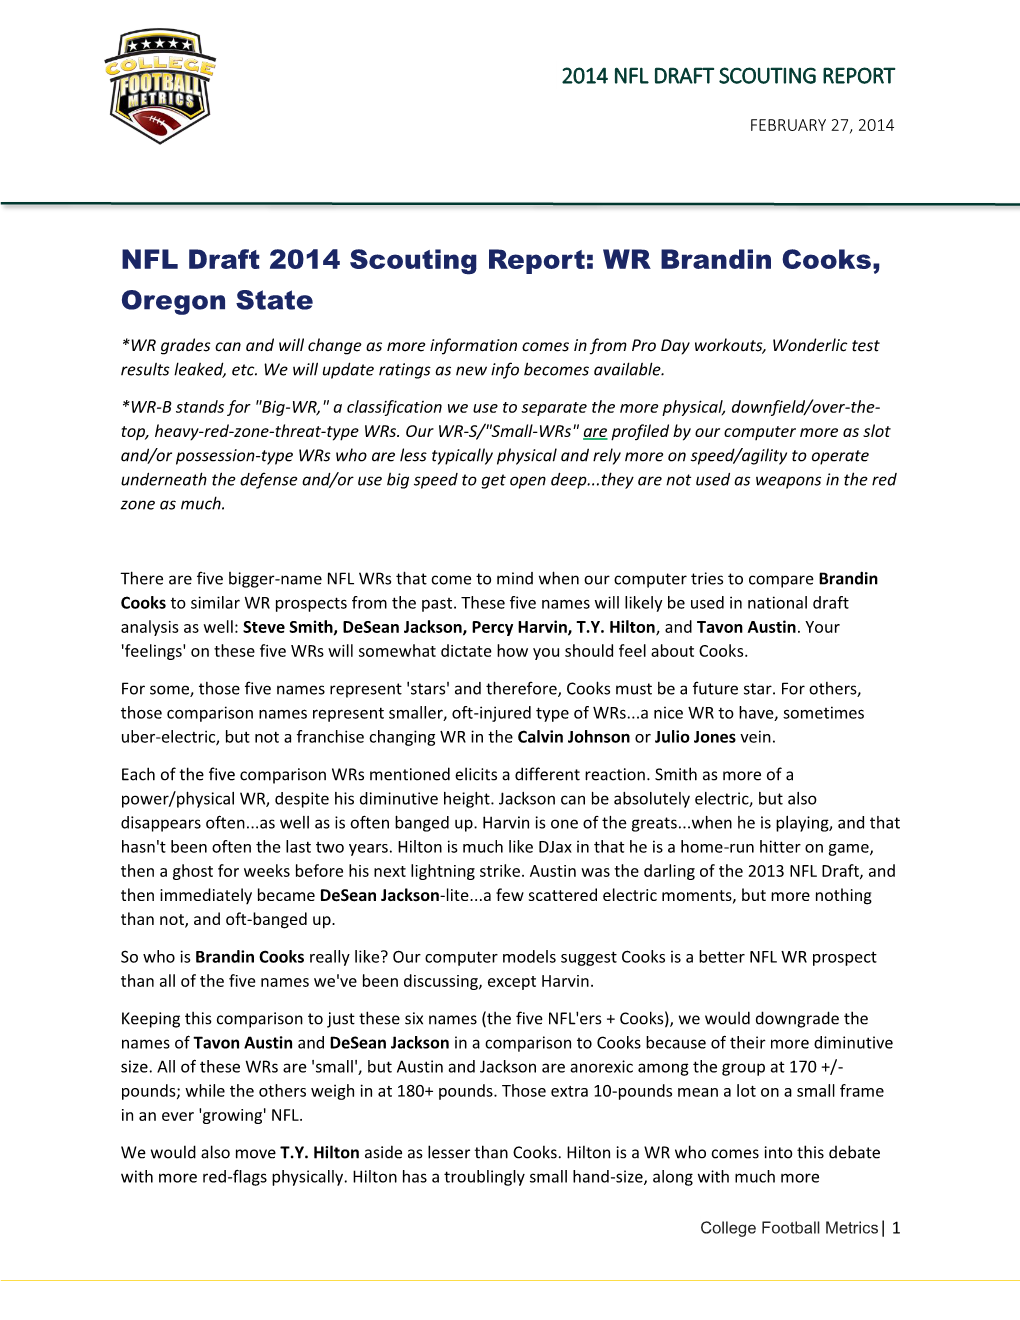 NFL Draft 2014 Scouting Report: WR Brandin Cooks, Oregon State